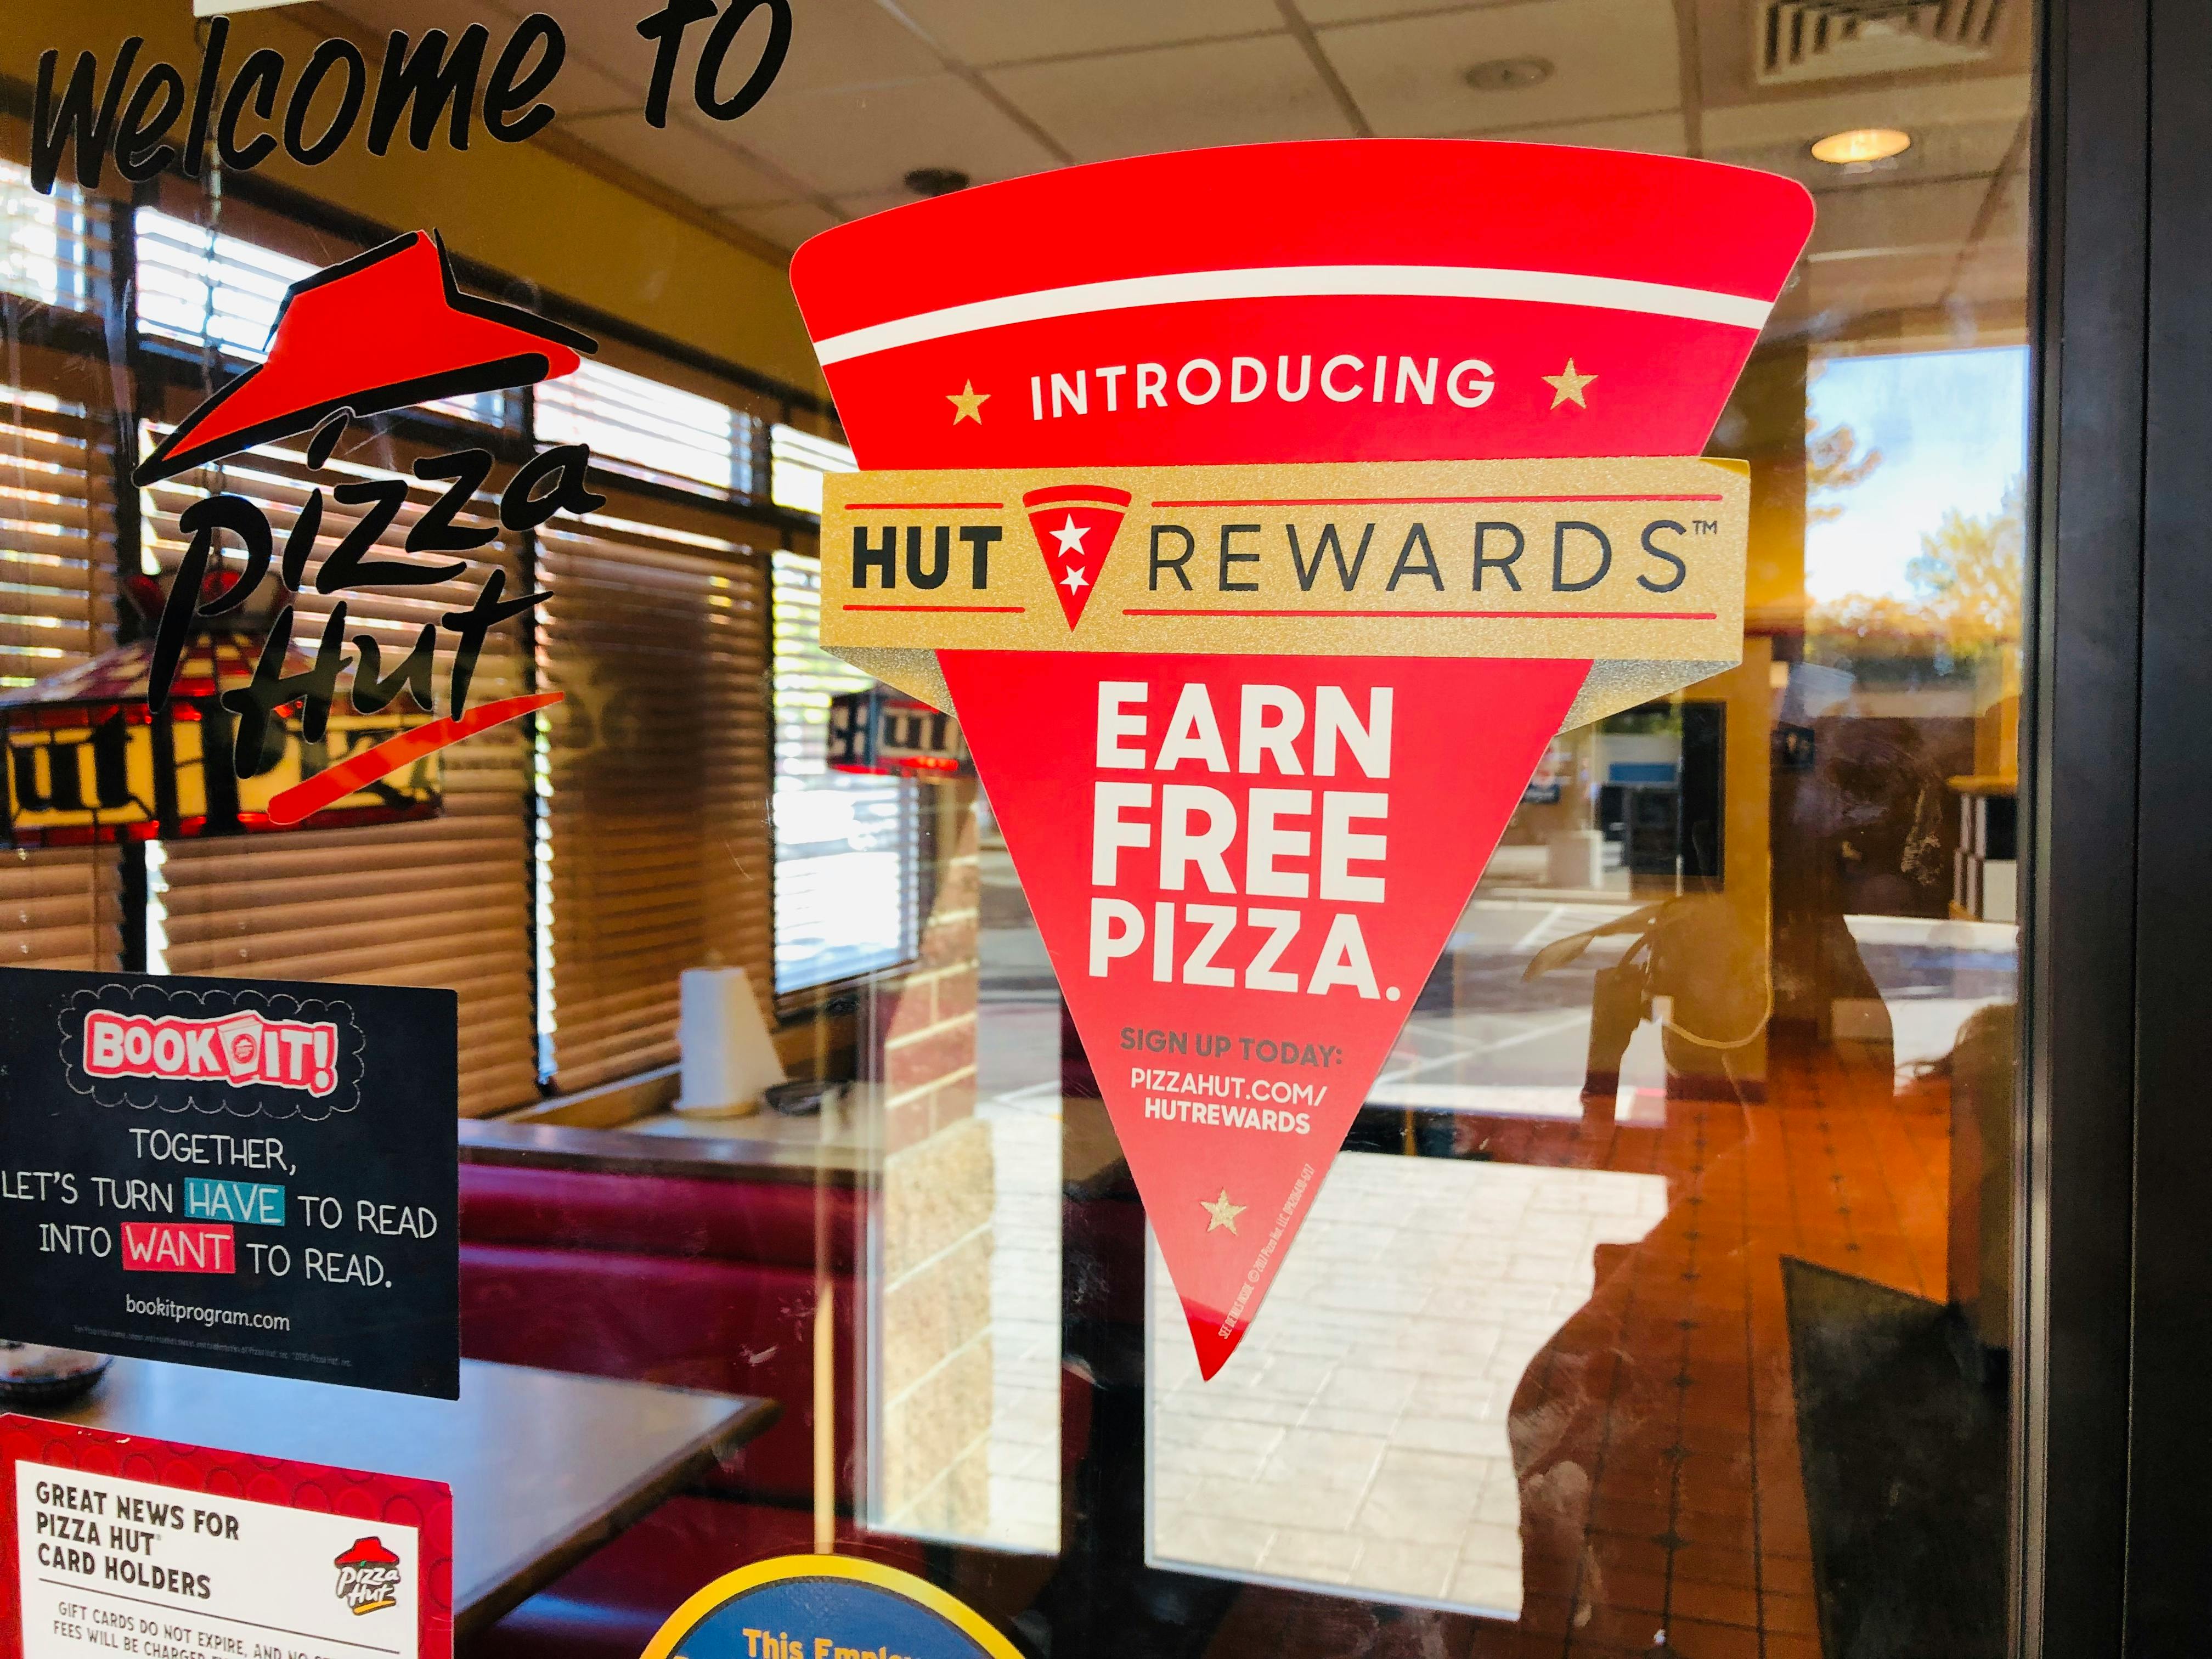 13 Pizza Hut Deals and Savings Tricks You Can't Live Without The